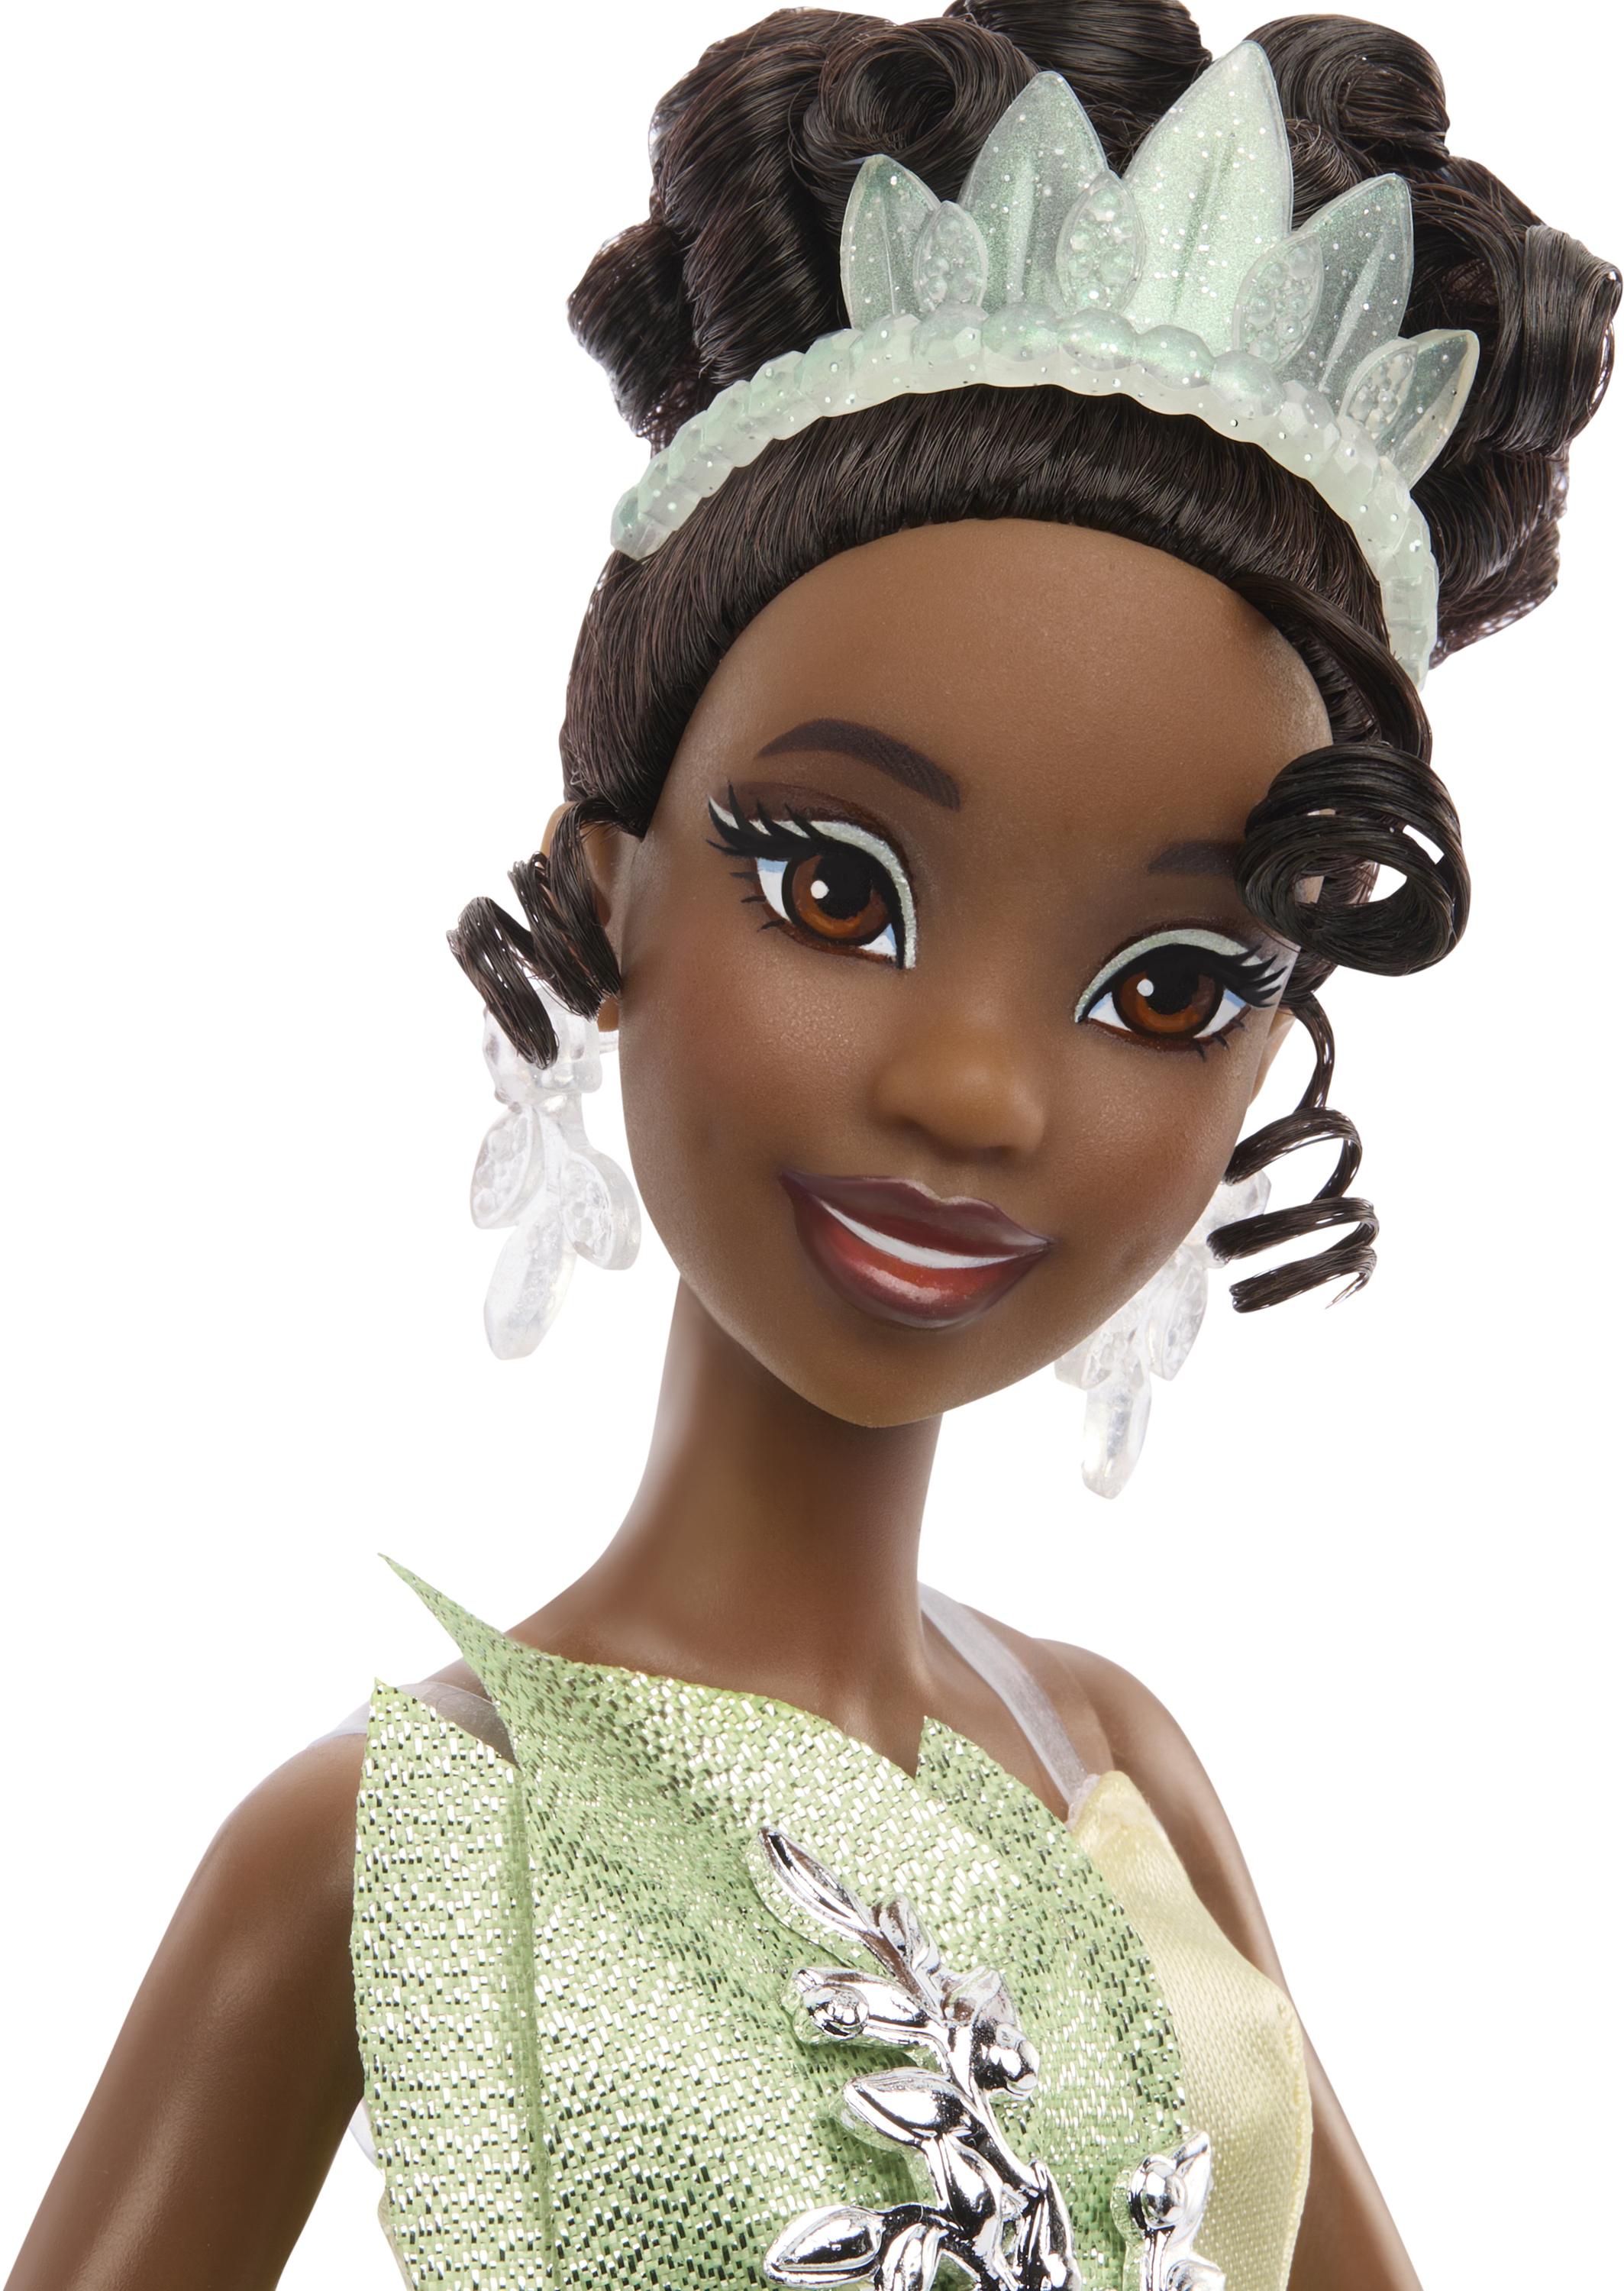 Disney Toys, Disney100 Collector Tiana Doll, Gifts for Kids and Collectors - image 2 of 6